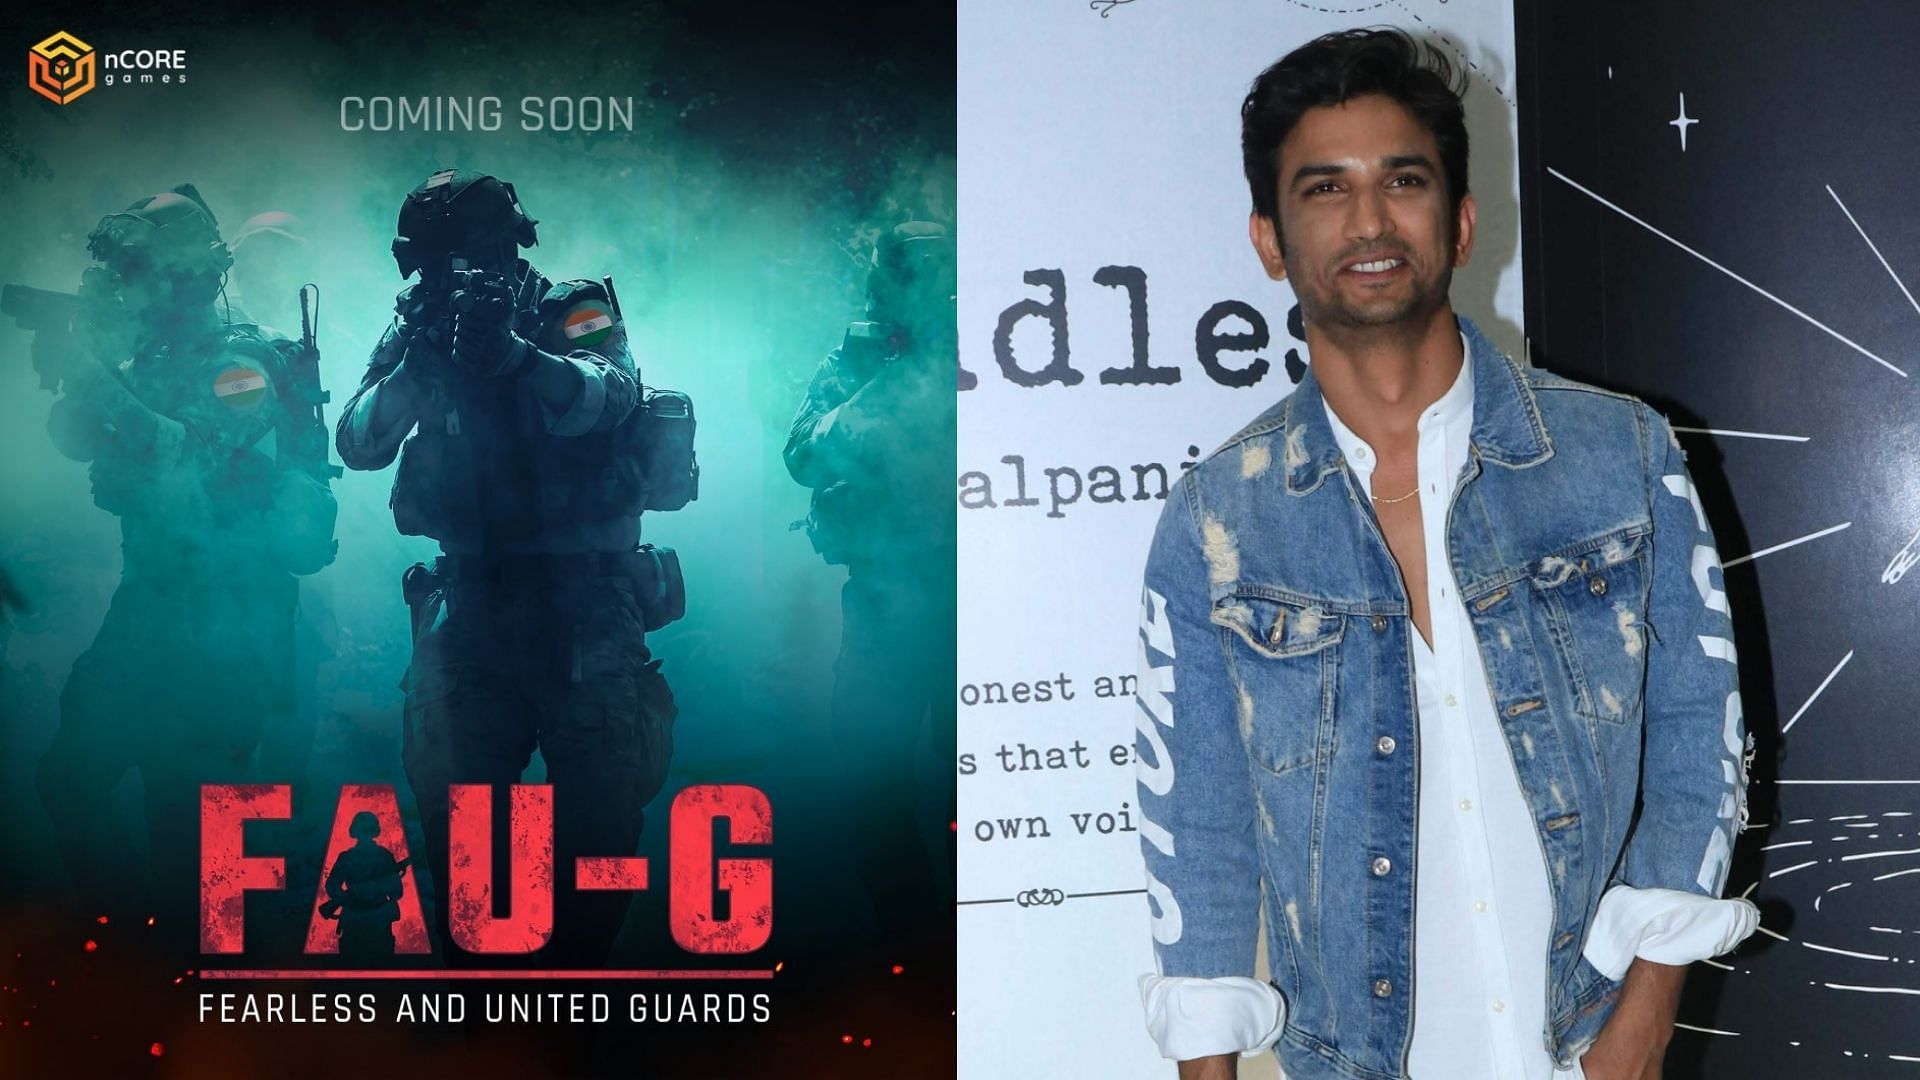 FAU-G was not conceptualised by Sushant Singh Rajput clarifies the game developers.